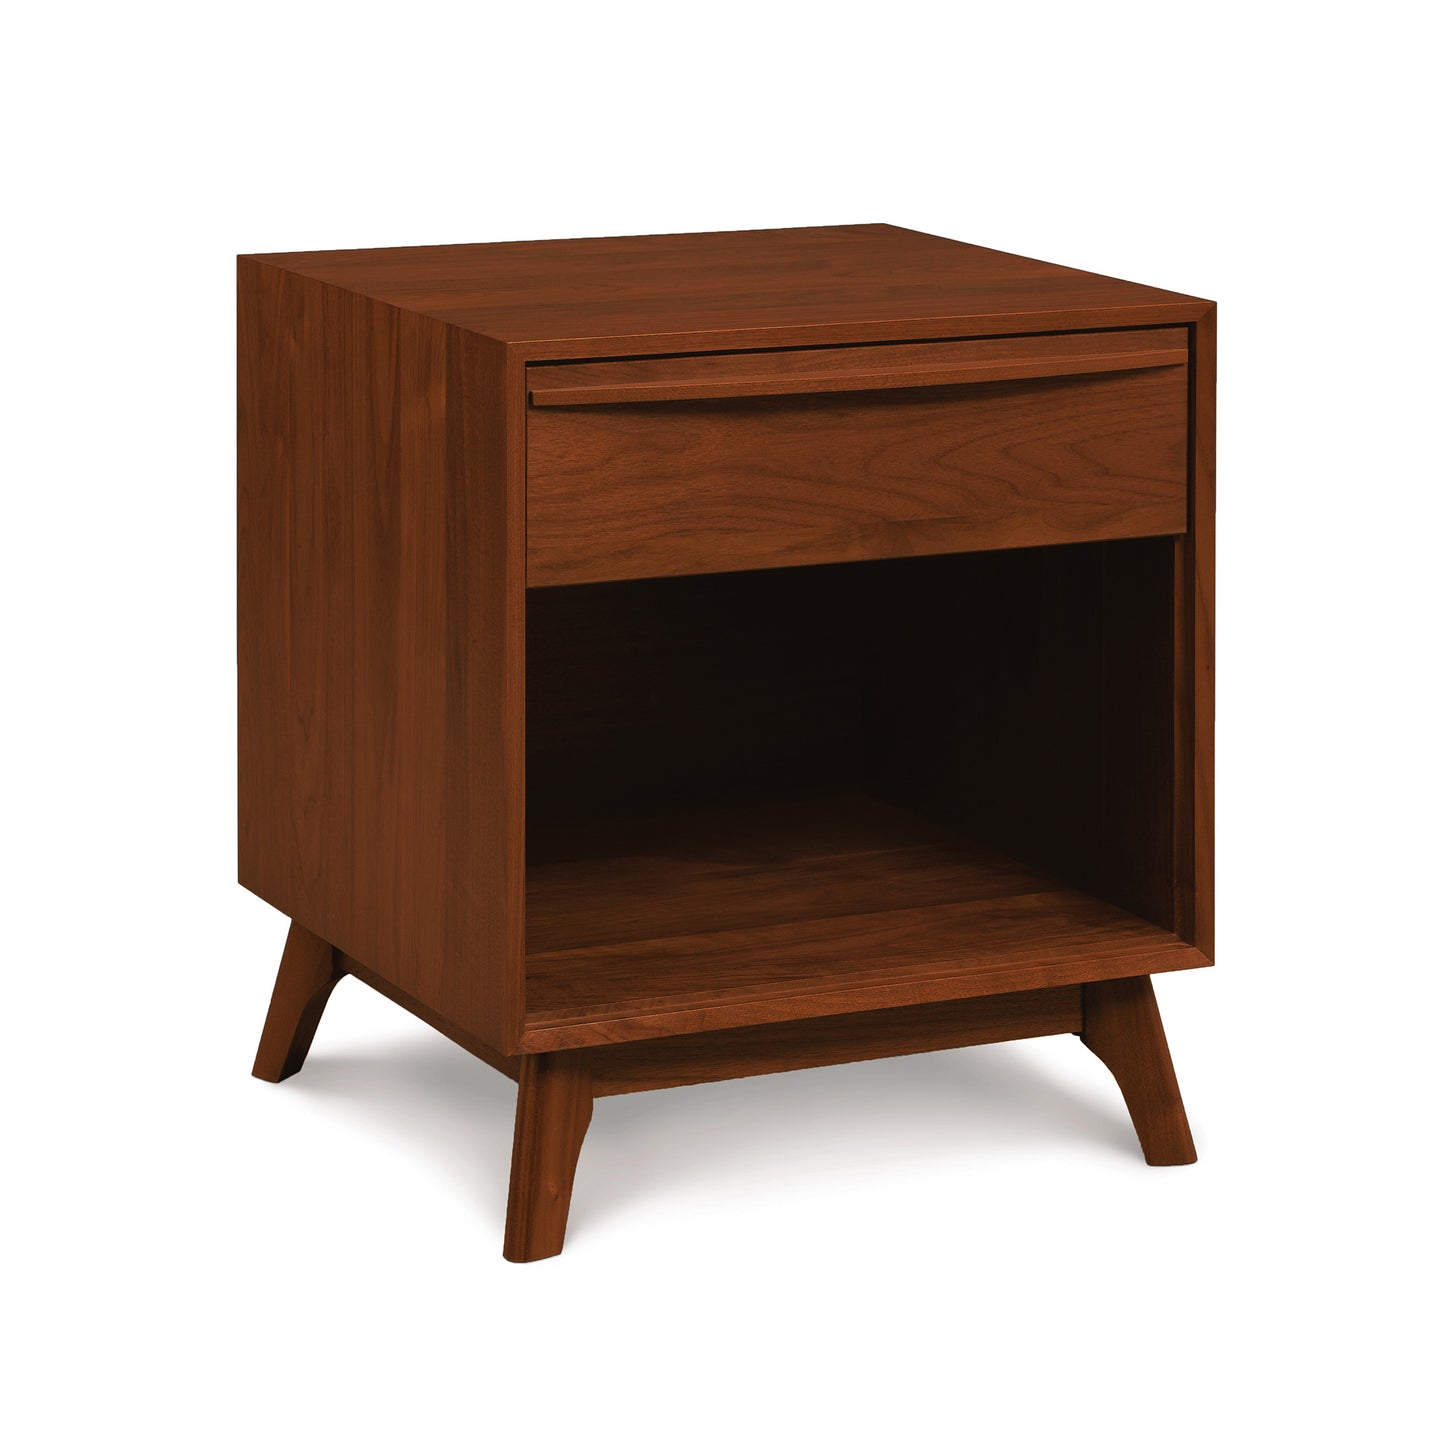 The Copeland Furniture Catalina 1-Drawer Enclosed Shelf Nightstand features two drawers and a shelf, making it a perfect addition to your modern bedroom. Crafted from solid wood, this nightstand combines functionality with timeless design.